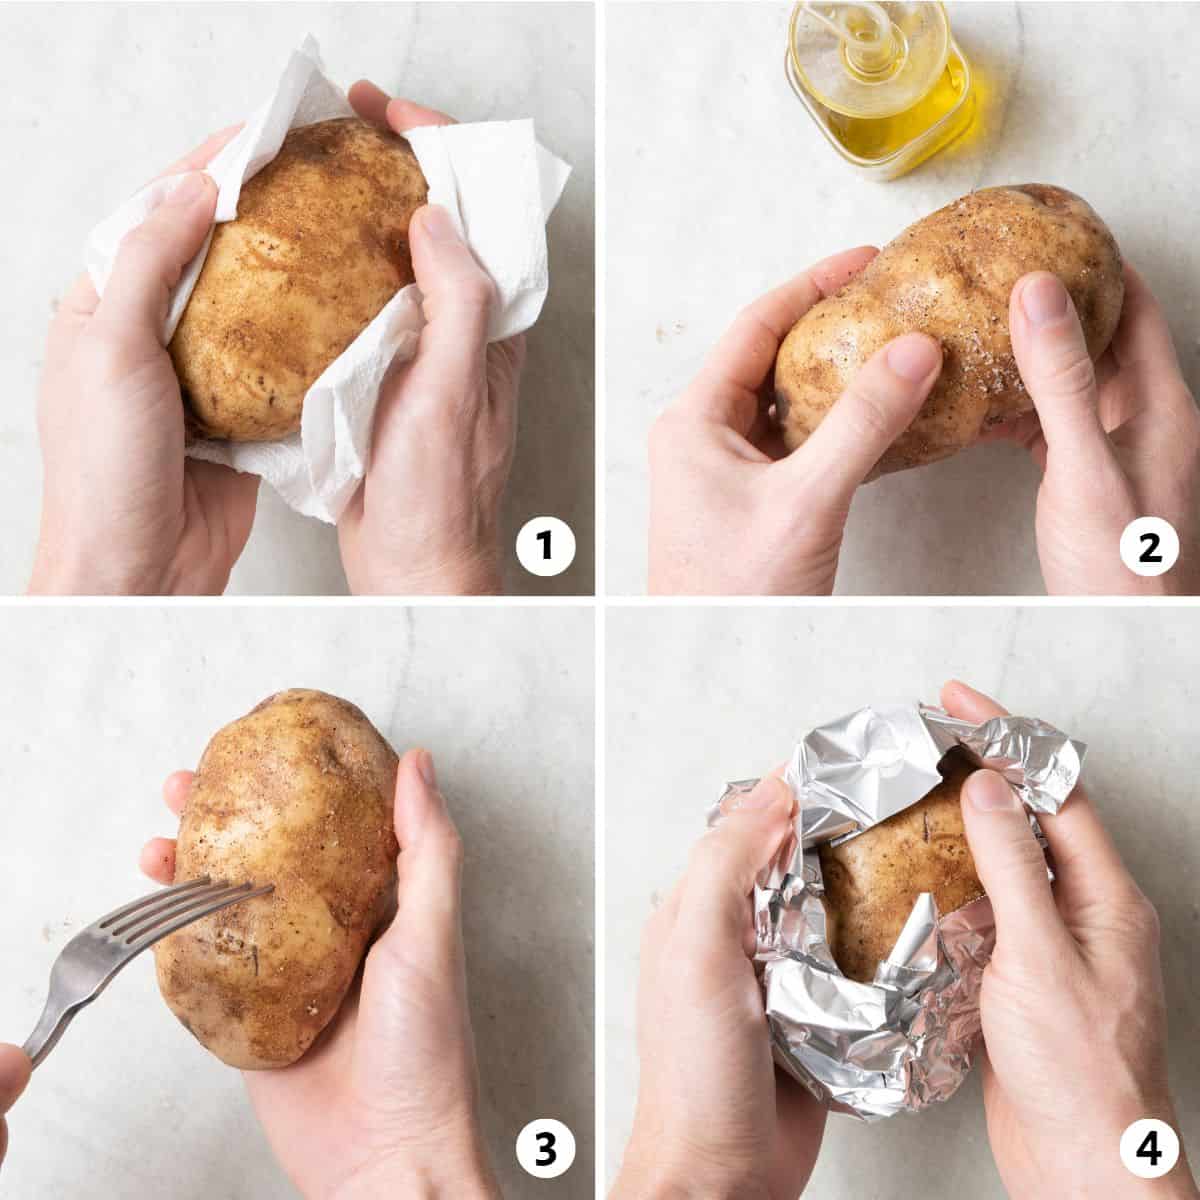 4 image collage making recipe: 1- drying a rinsed baking potato with paper towels, 2- rubbing oil over the skin of the potato, 3- piercing it with a fork, 4- wrapping with foil.